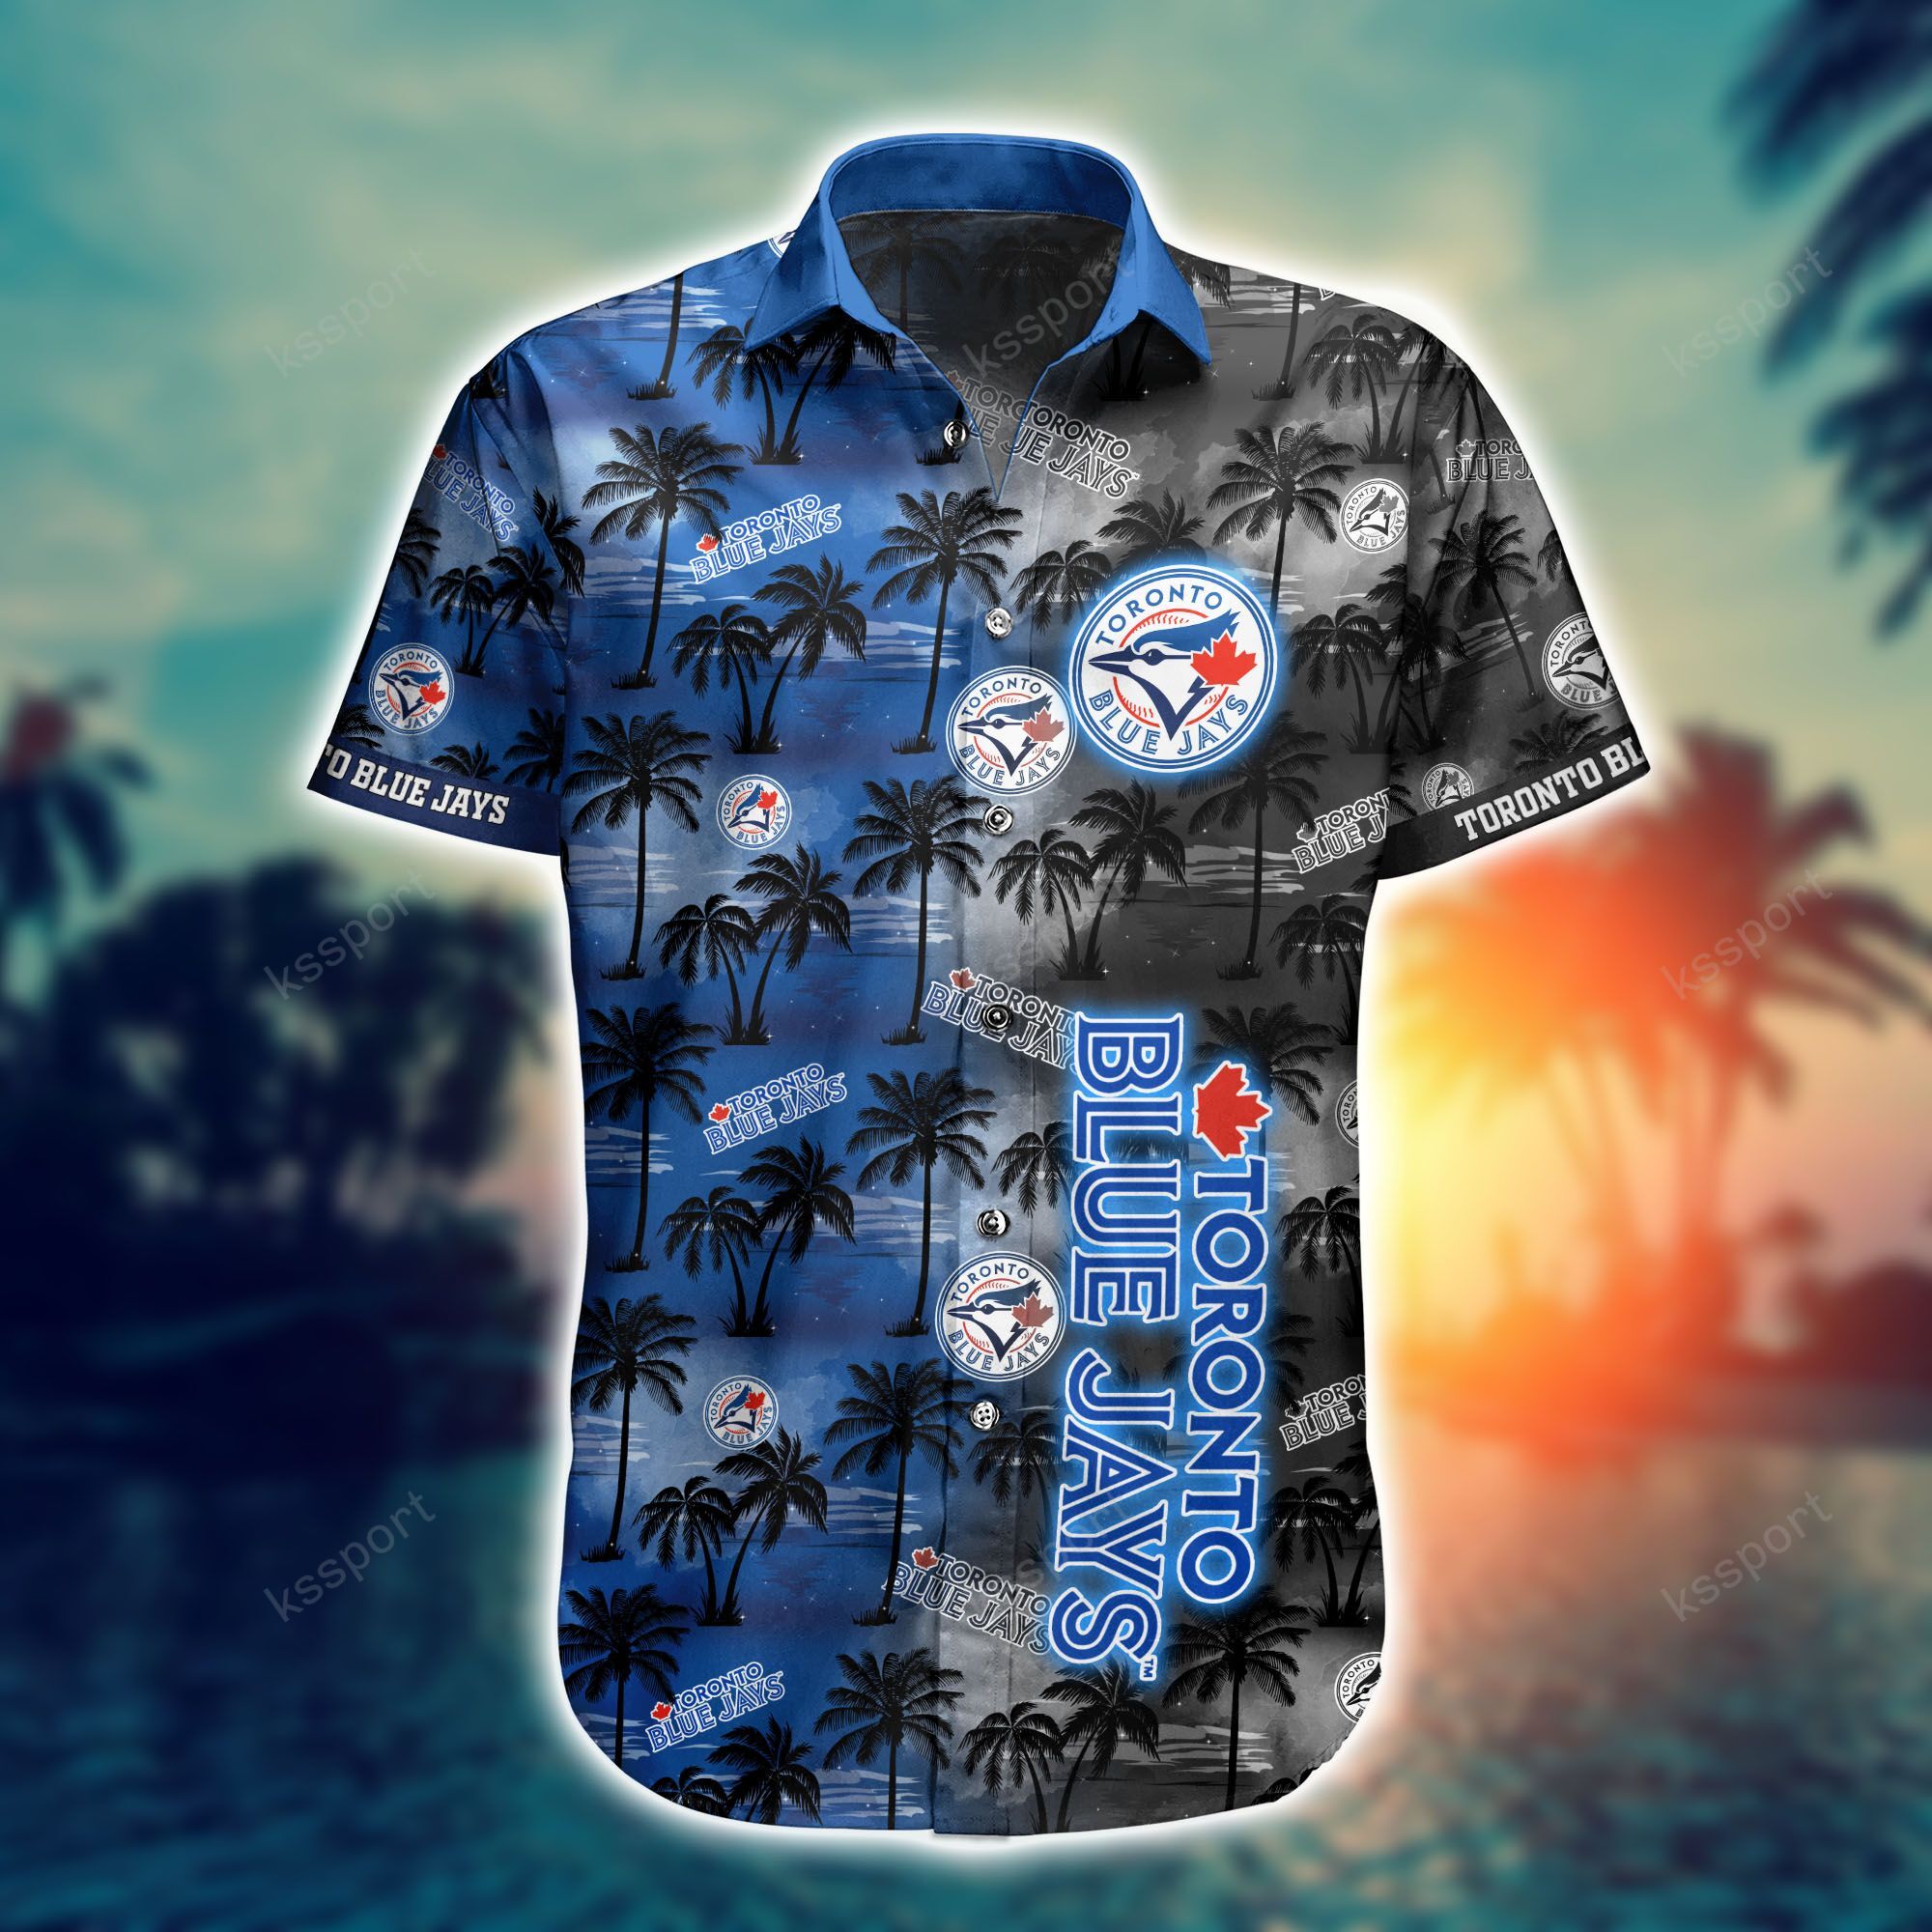 Top cool Hawaiian shirt 2022 - Make sure you get yours today before they run out! 225